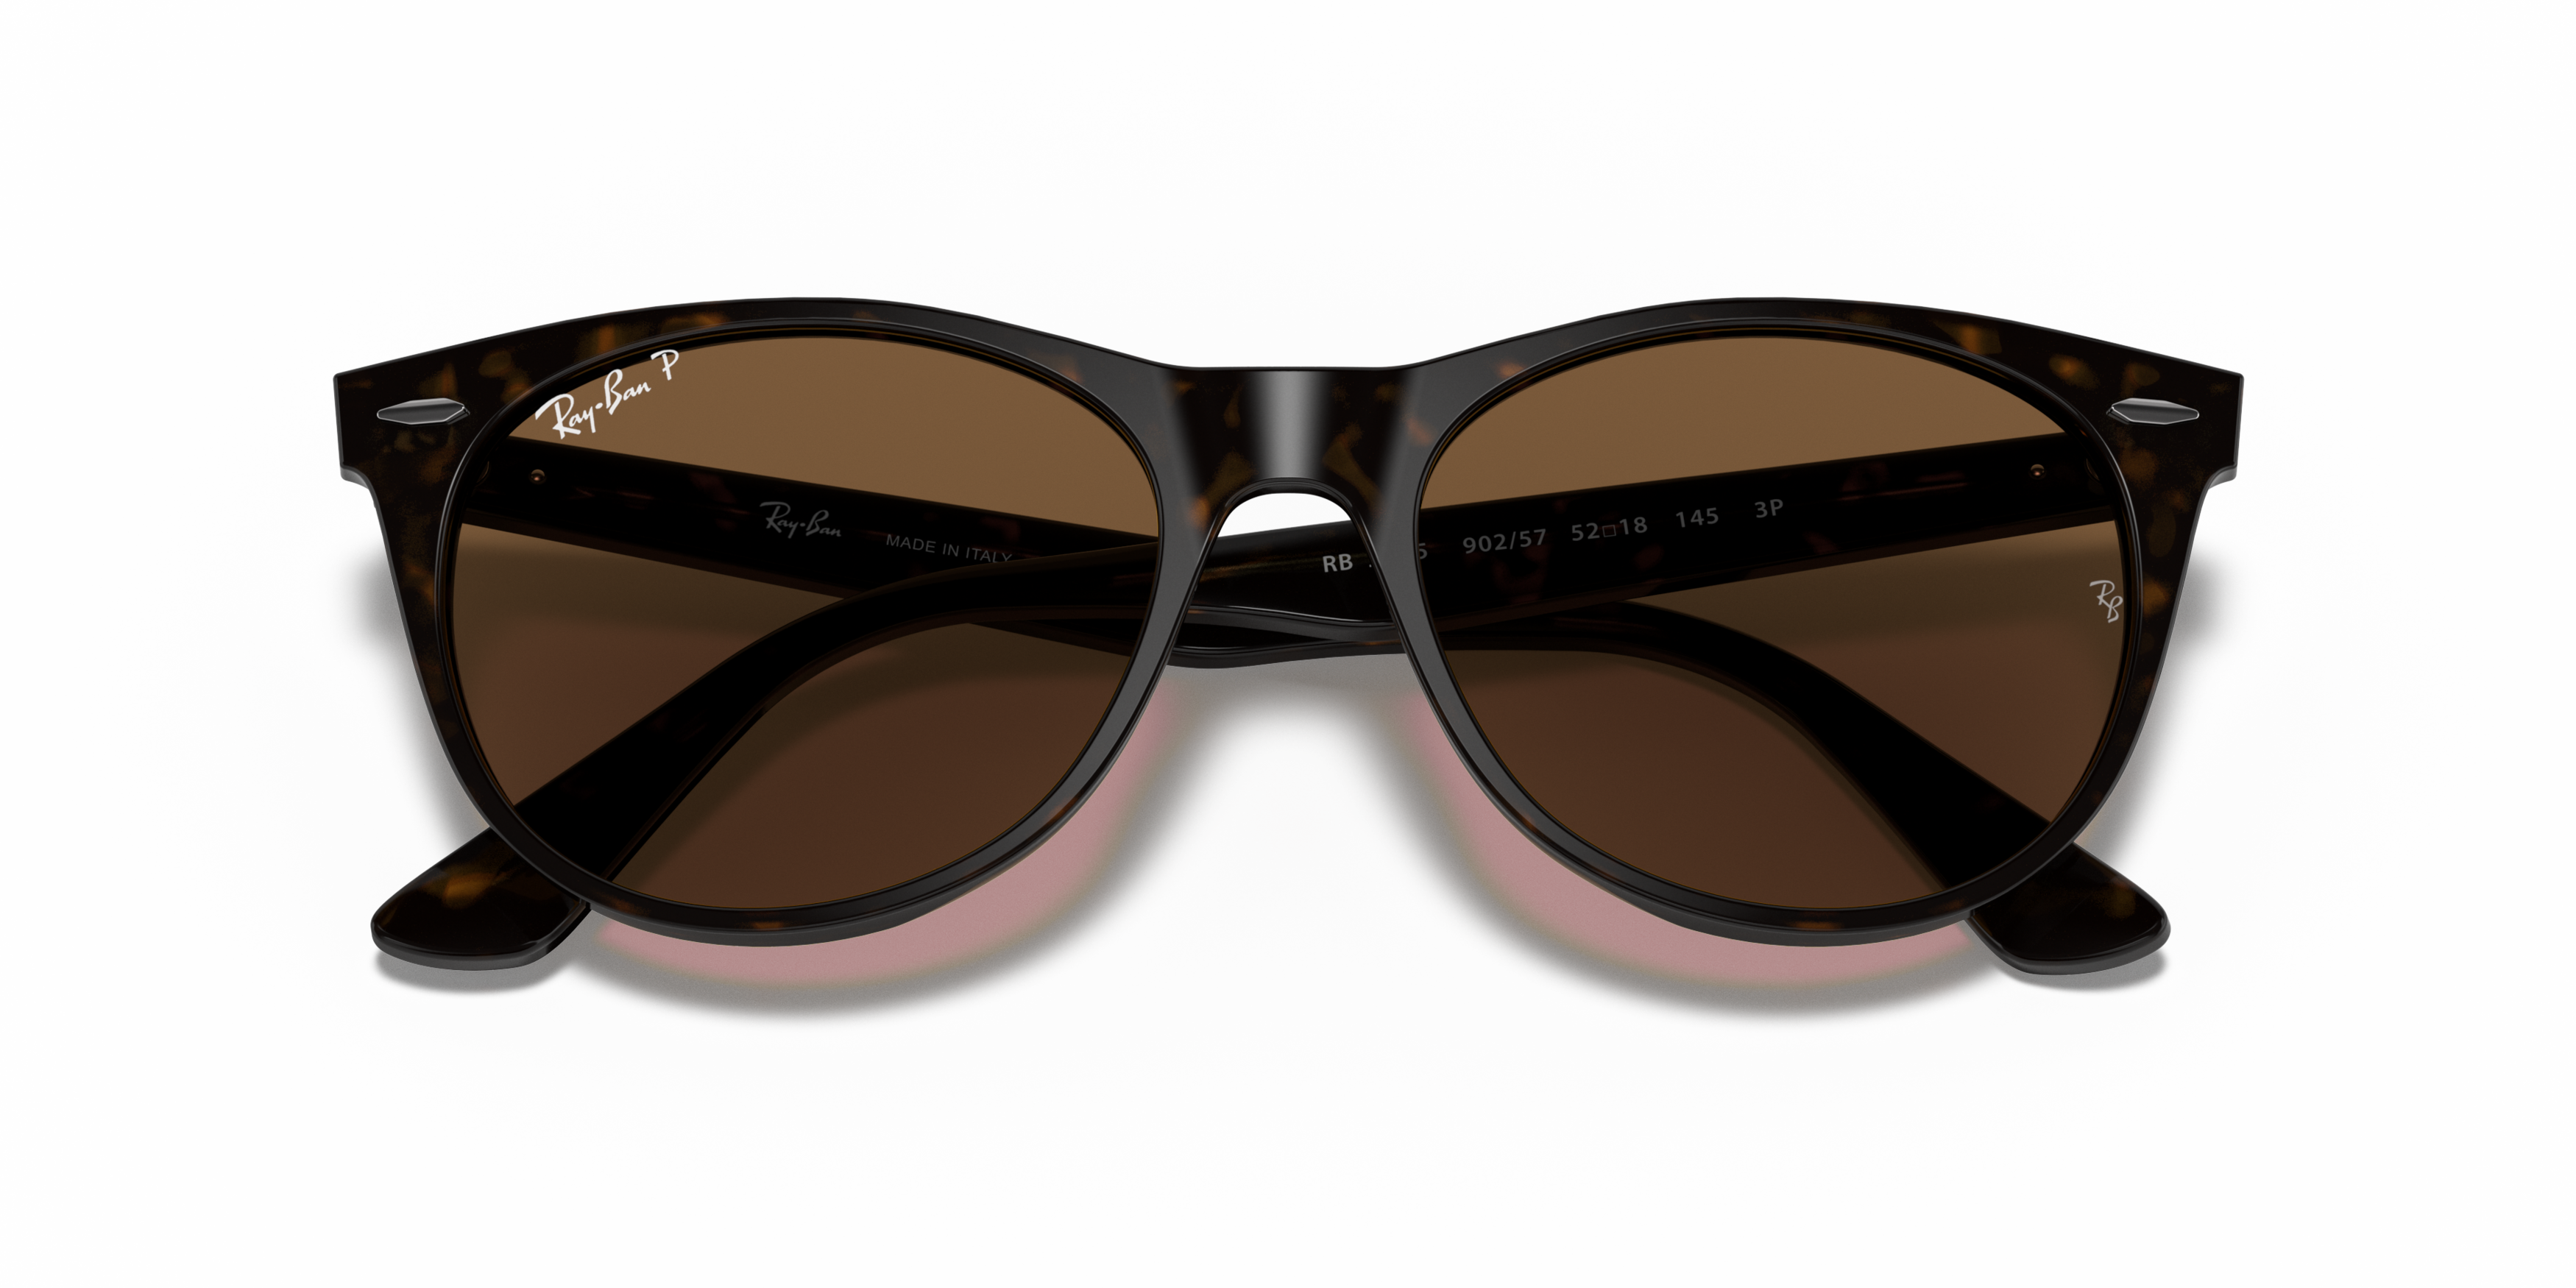 [products.image.folded] RAY-BAN RB2185 902/57